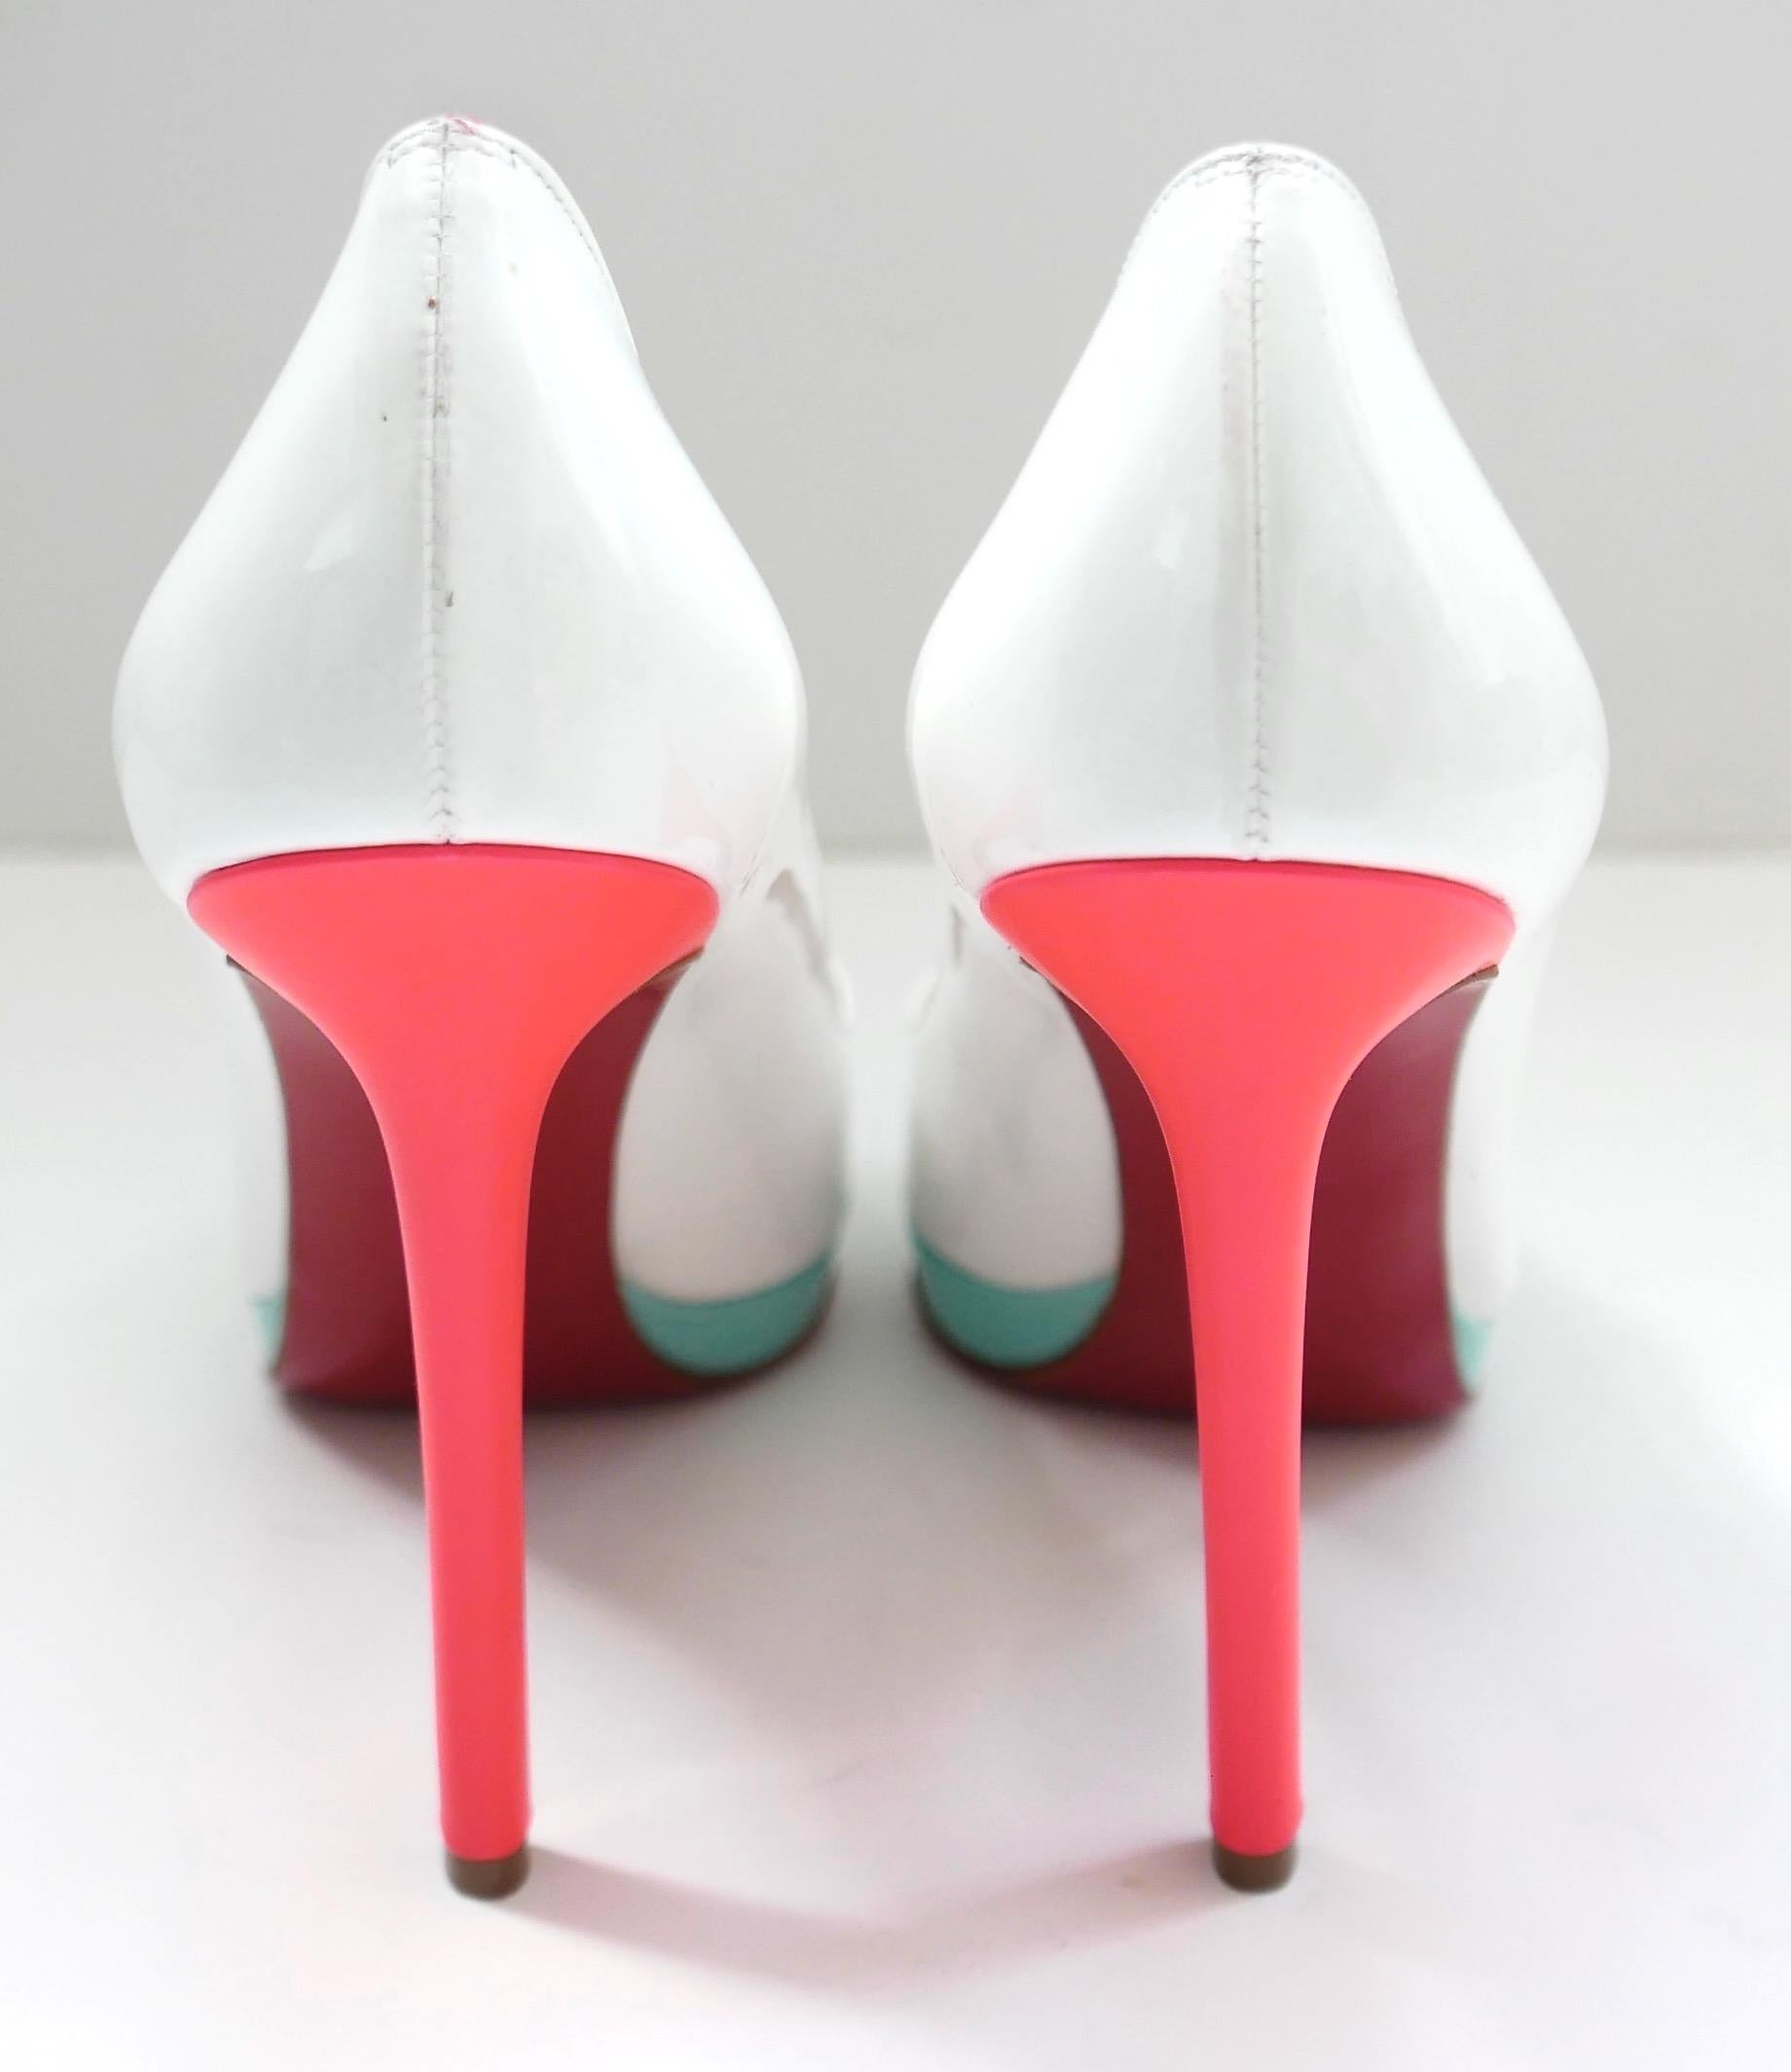 Super cool Christian Louboutin Pigalle Plato heels in white patent leather with neon pink heels and slim turquoise platform. Taille 36.5. Mesure environ - 10